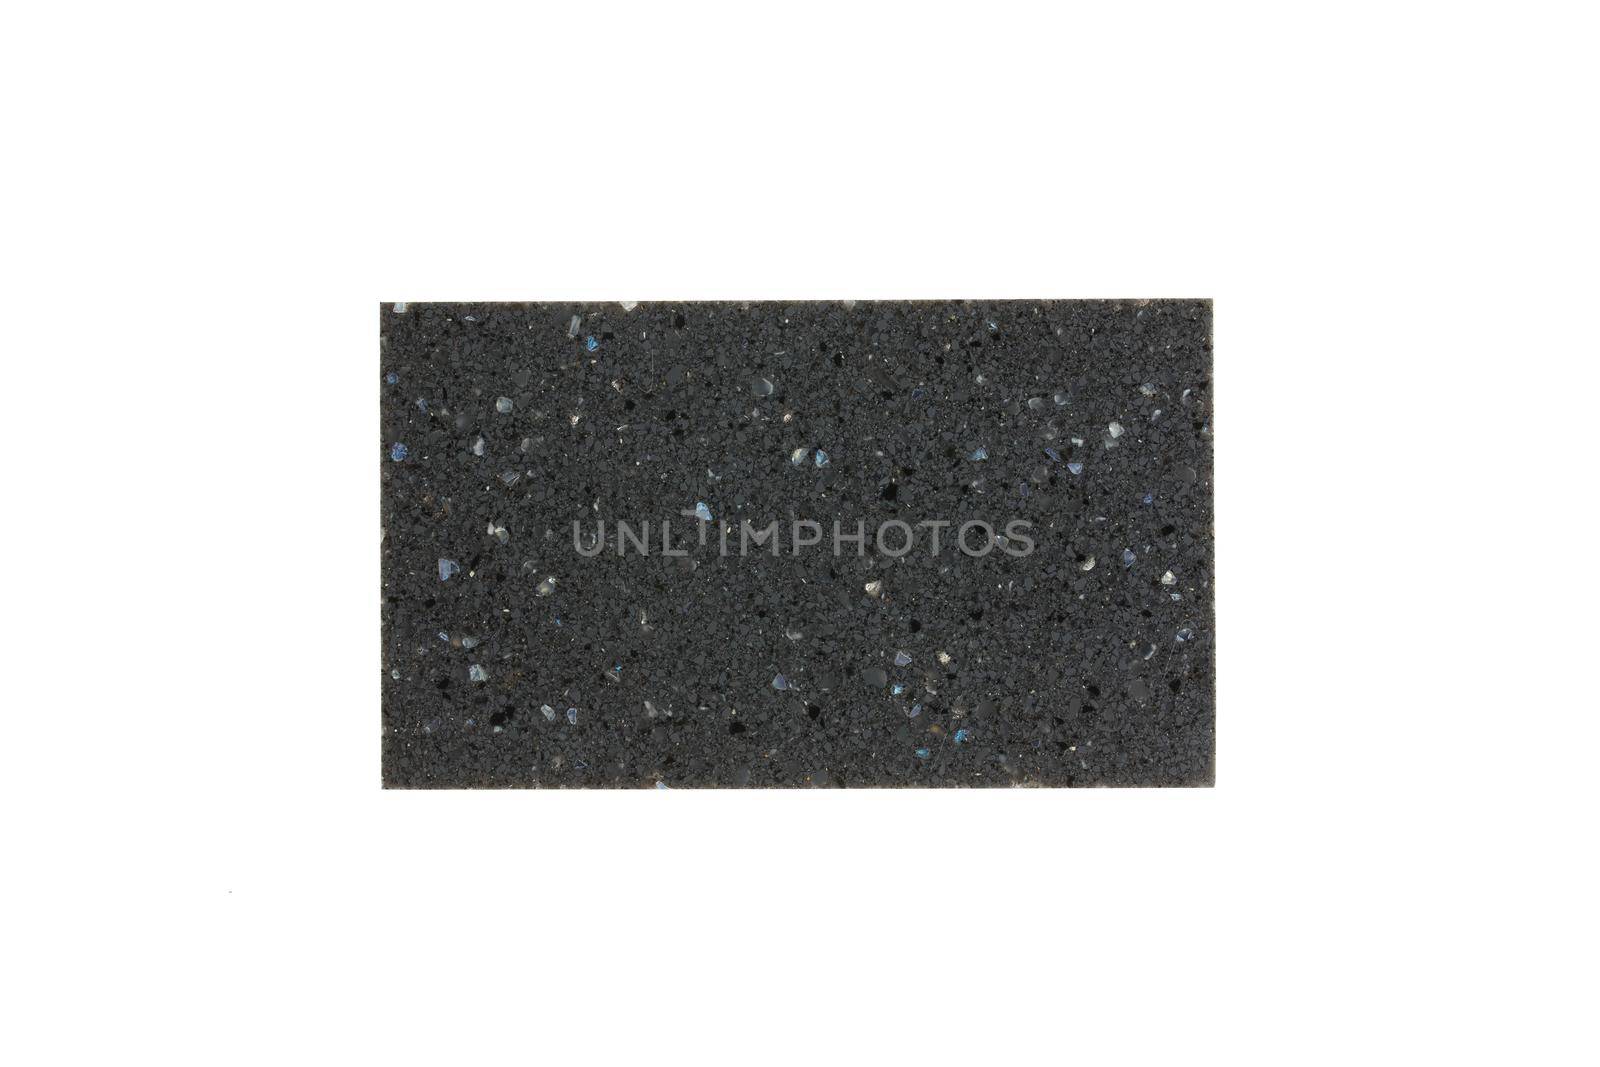 Sample of artificial stone by BY-_-BY